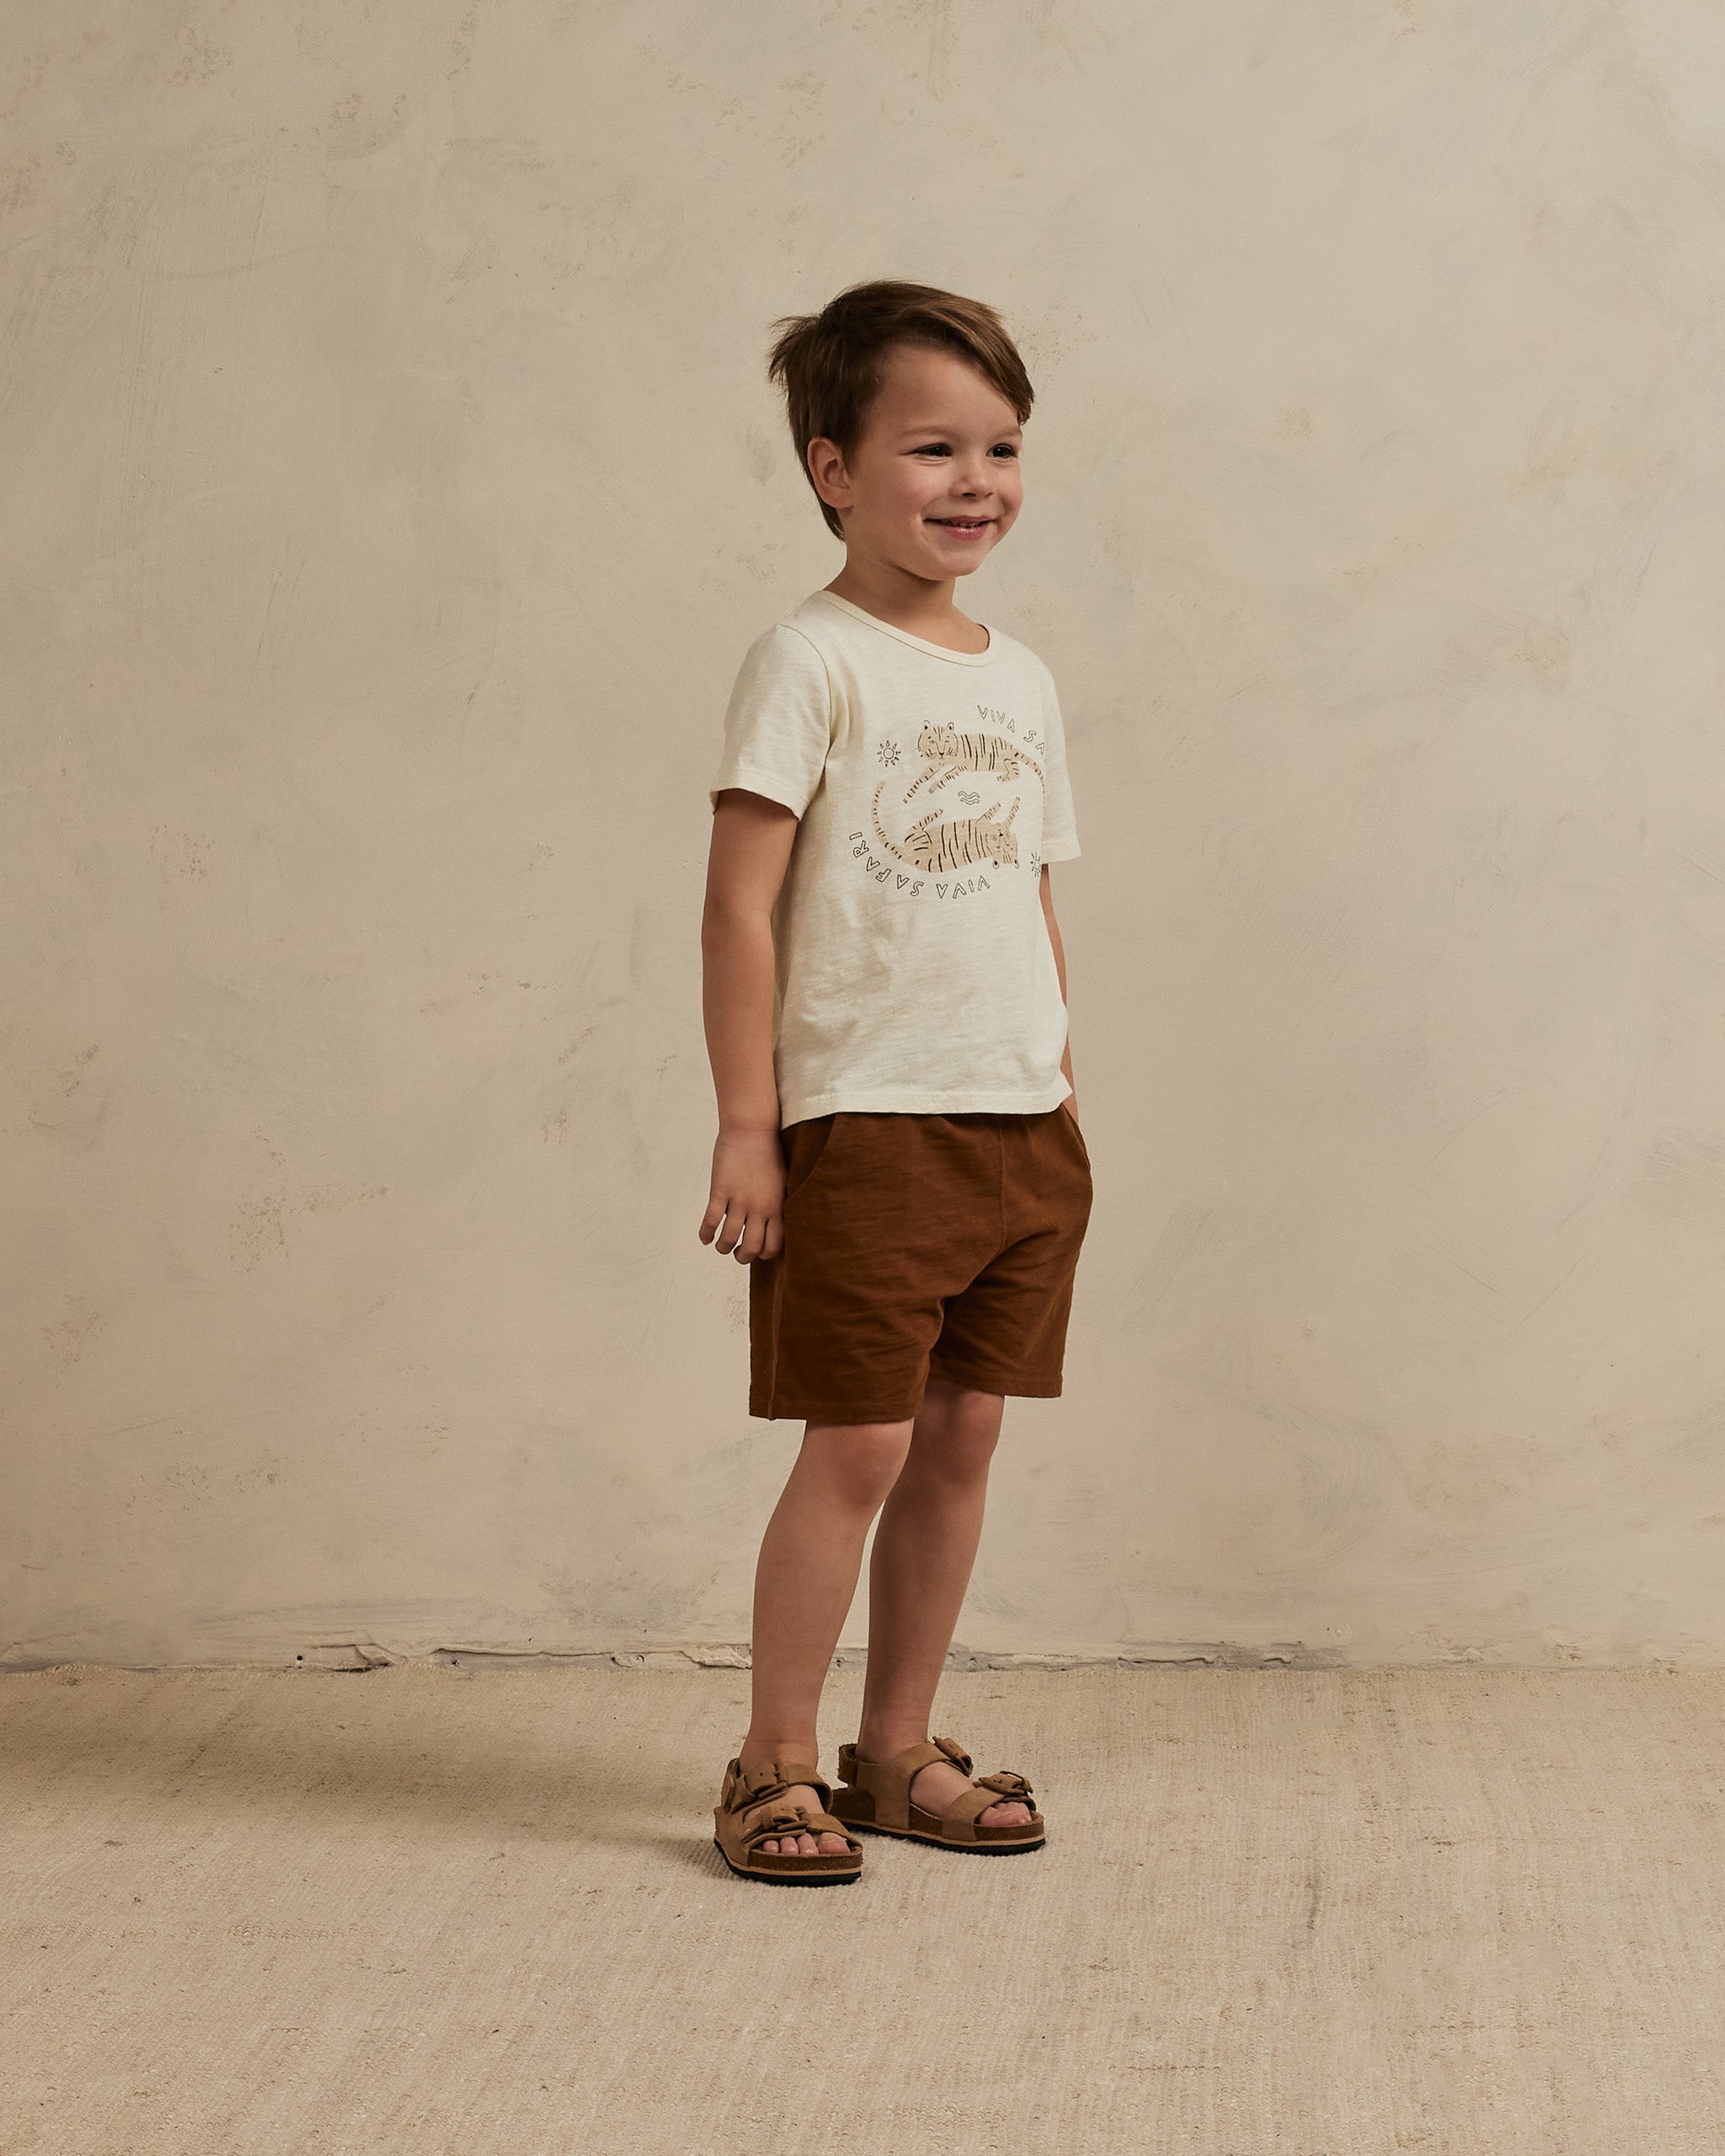 sam short || chocolate - Rylee + Cru | Kids Clothes | Trendy Baby Clothes | Modern Infant Outfits |